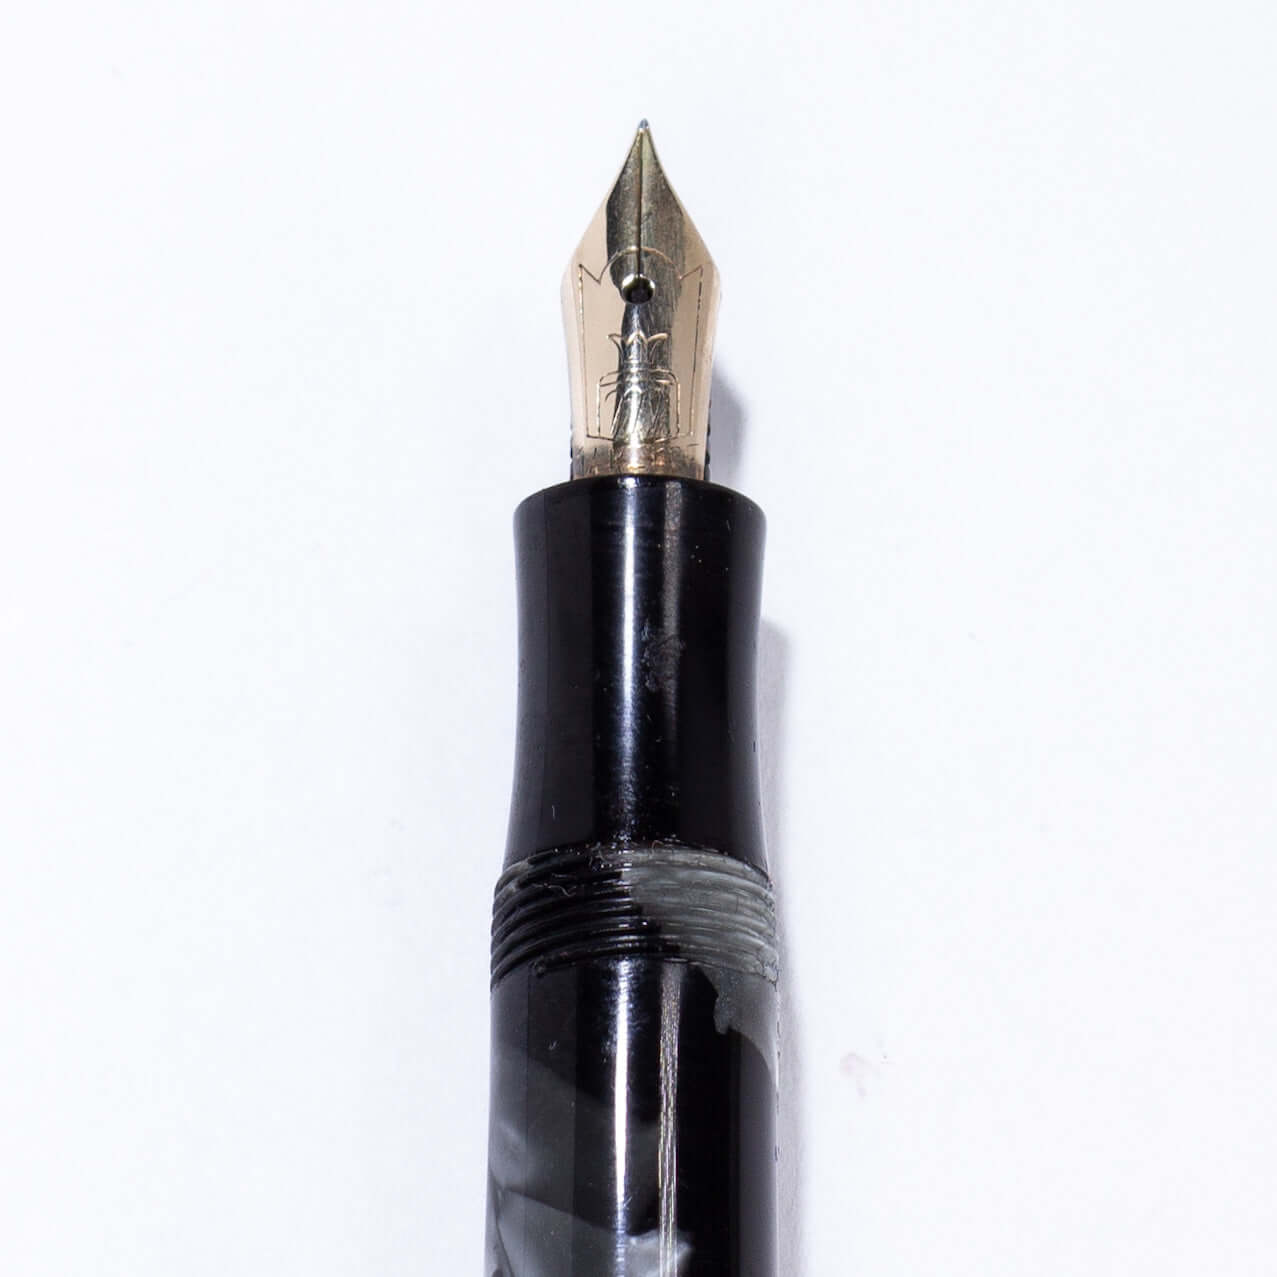 Merlin 33 Fountain Pen, Black and Grey Pearl, Gold Trim 14K Merlin Nib, Flexible, Button Filler with New Sac Installed